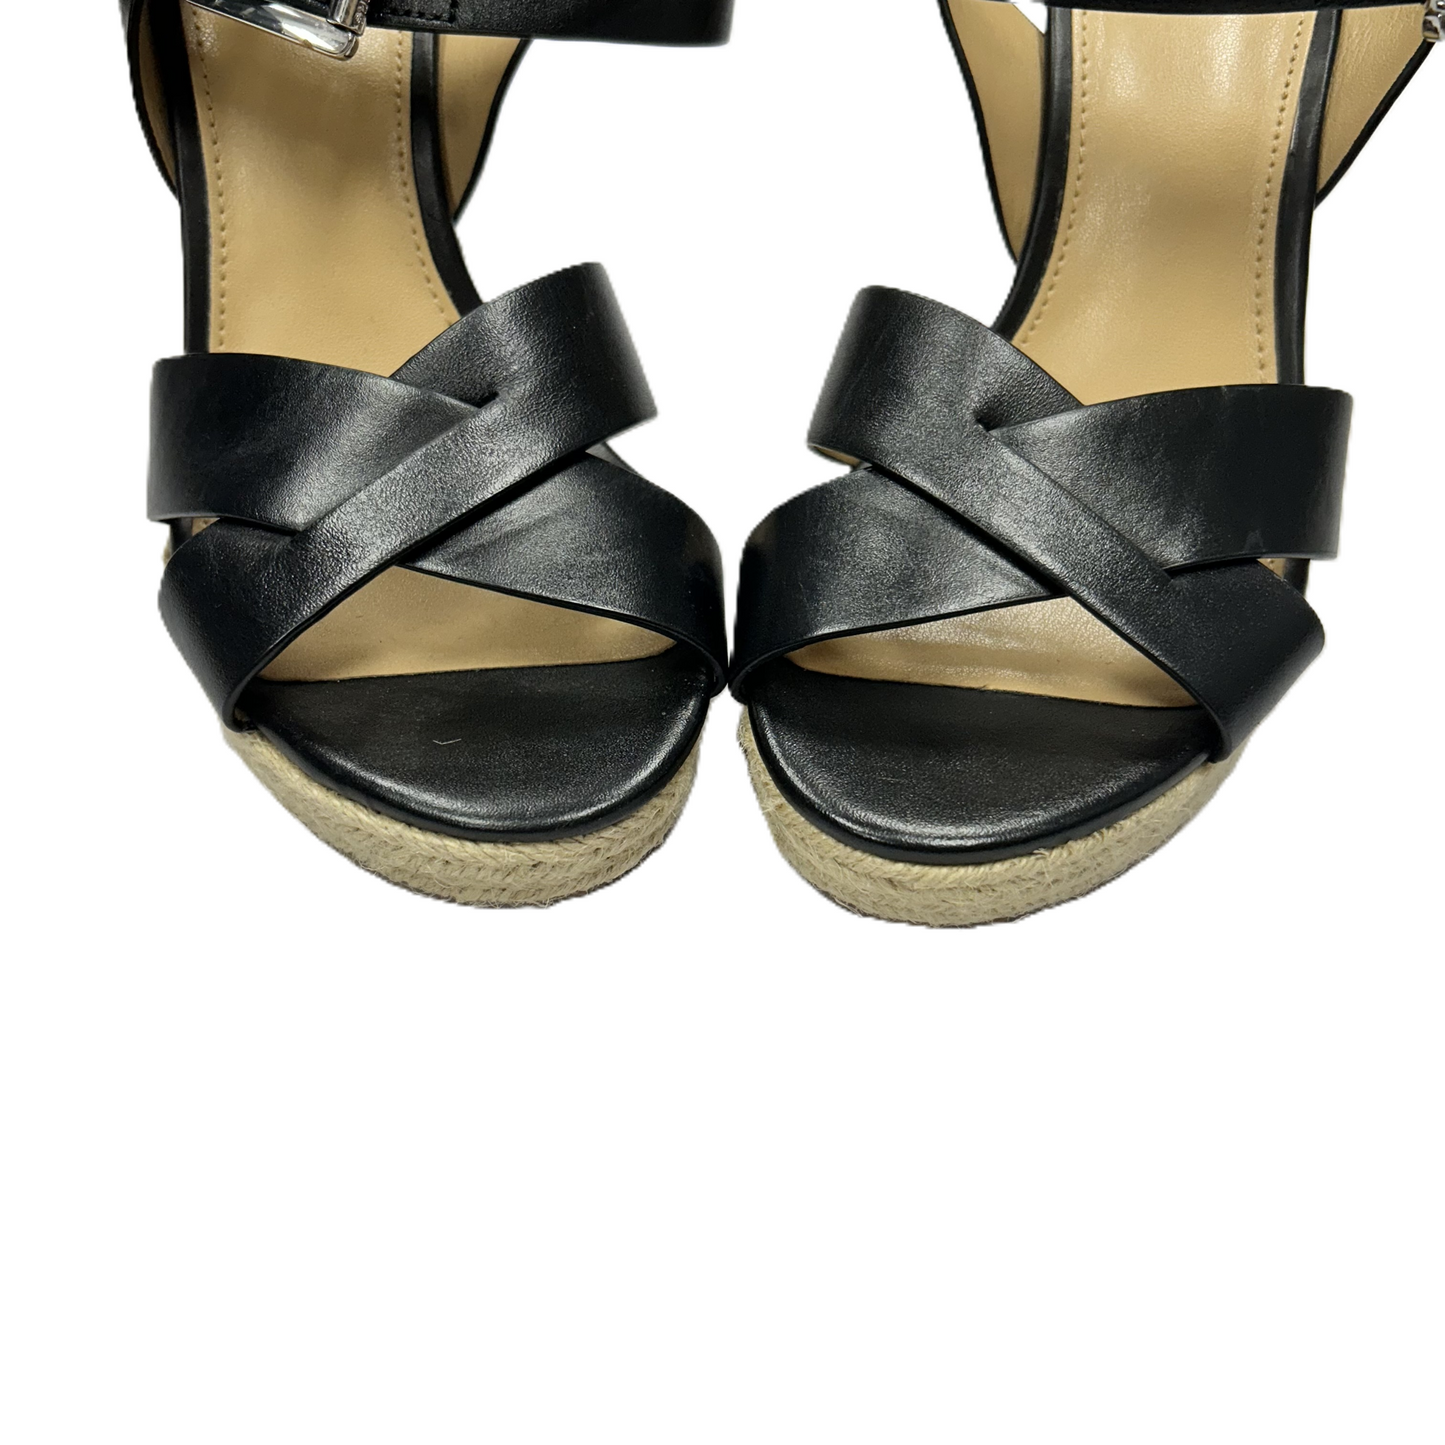 Black Shoes Heels Wedge By Michael By Michael Kors, Size: 6.5